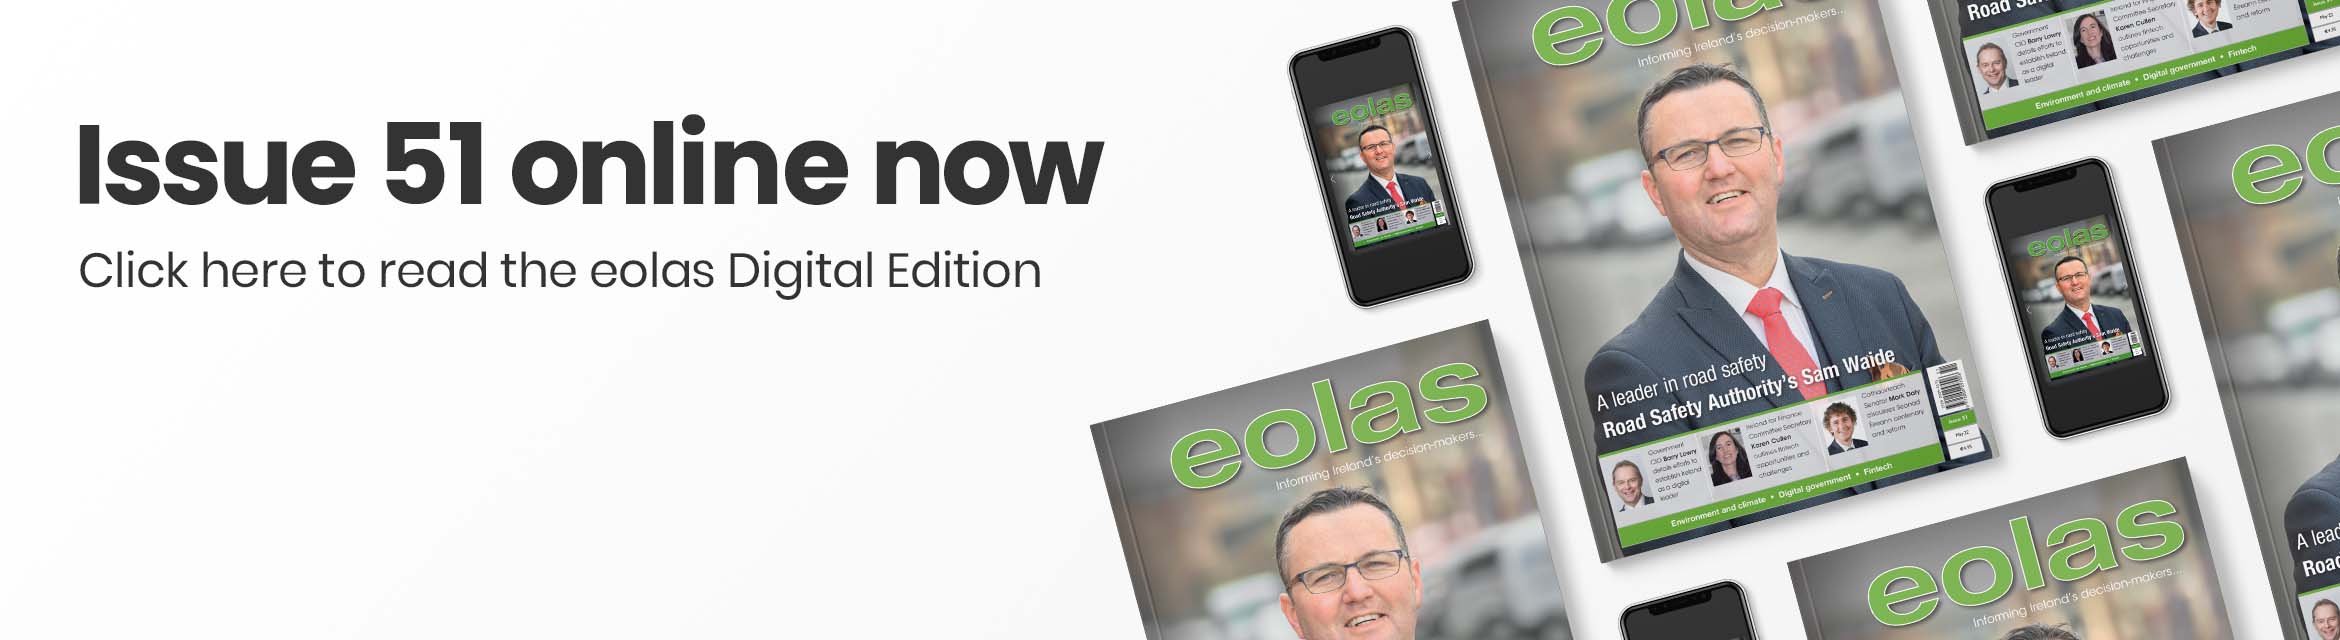 Issue 50 online now • Read the eolas Digital Edition